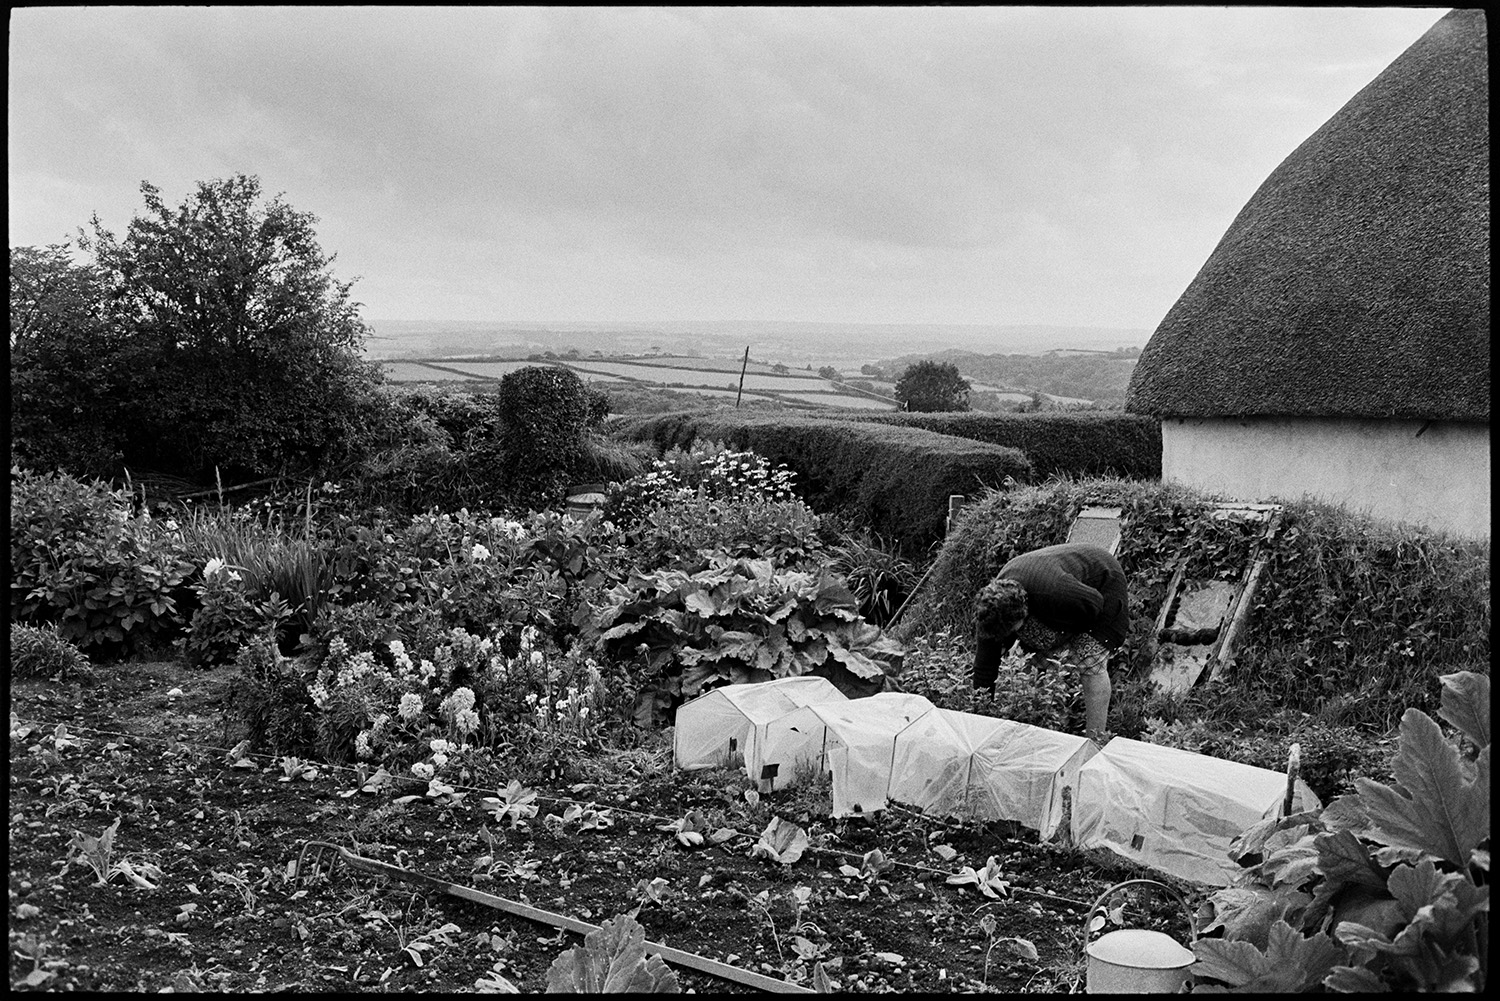 Vegetable and flower garden. 
[Mrs Piper working in a vegetable garden at Upcott, Dolton. Flowers and polythene cloches can be seen in the garden and a thatched cottage is visible in the background.]